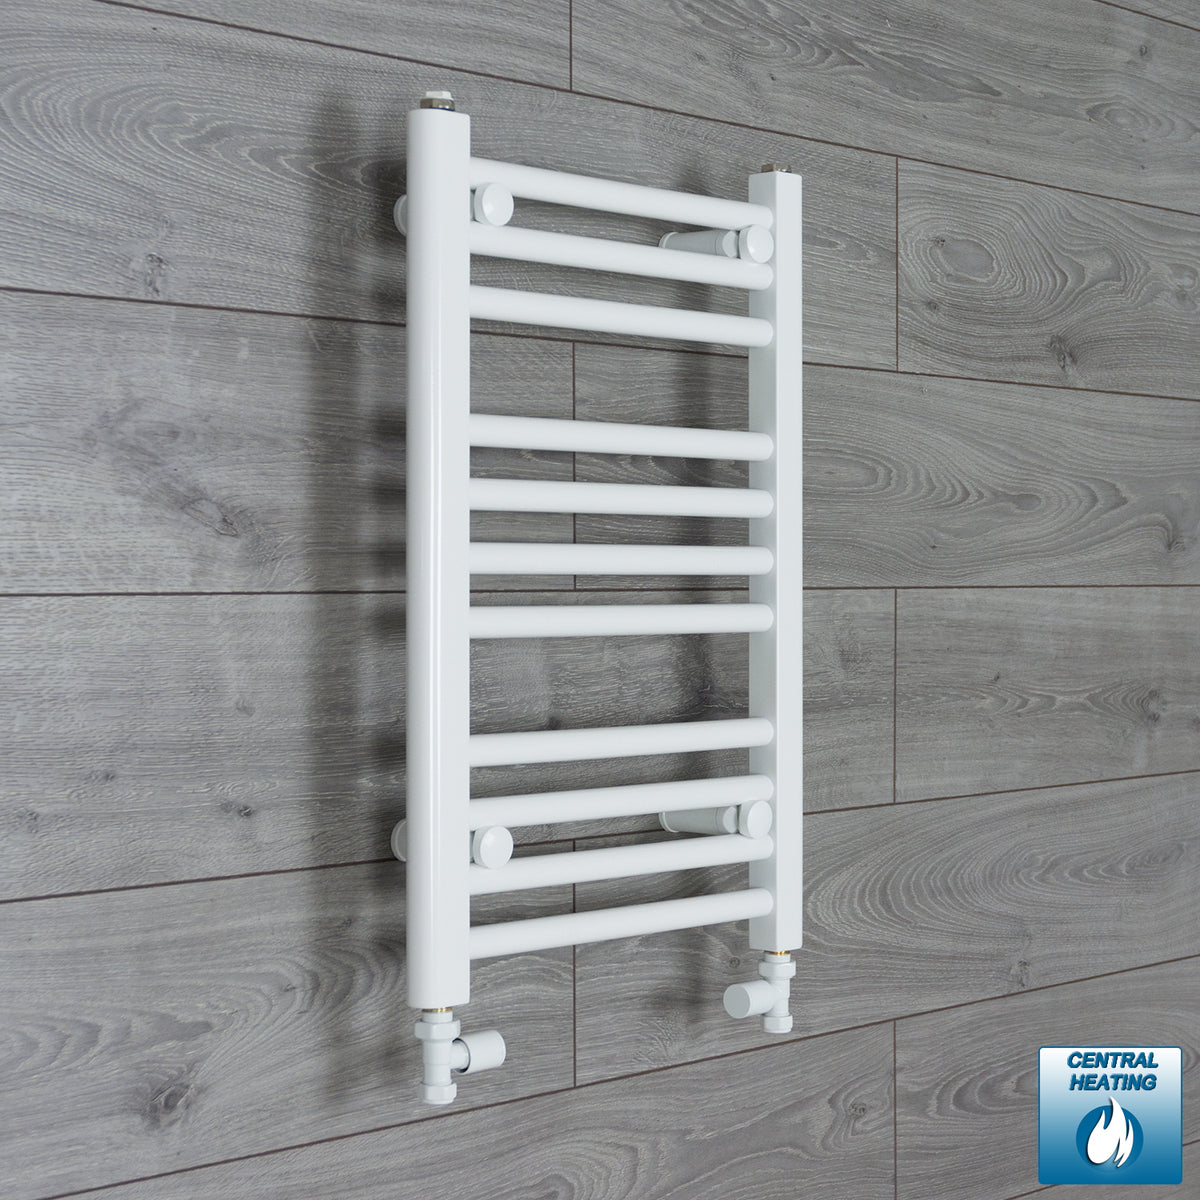 400mm Wide 600mm High White Towel Rail Radiator With Straight Valve